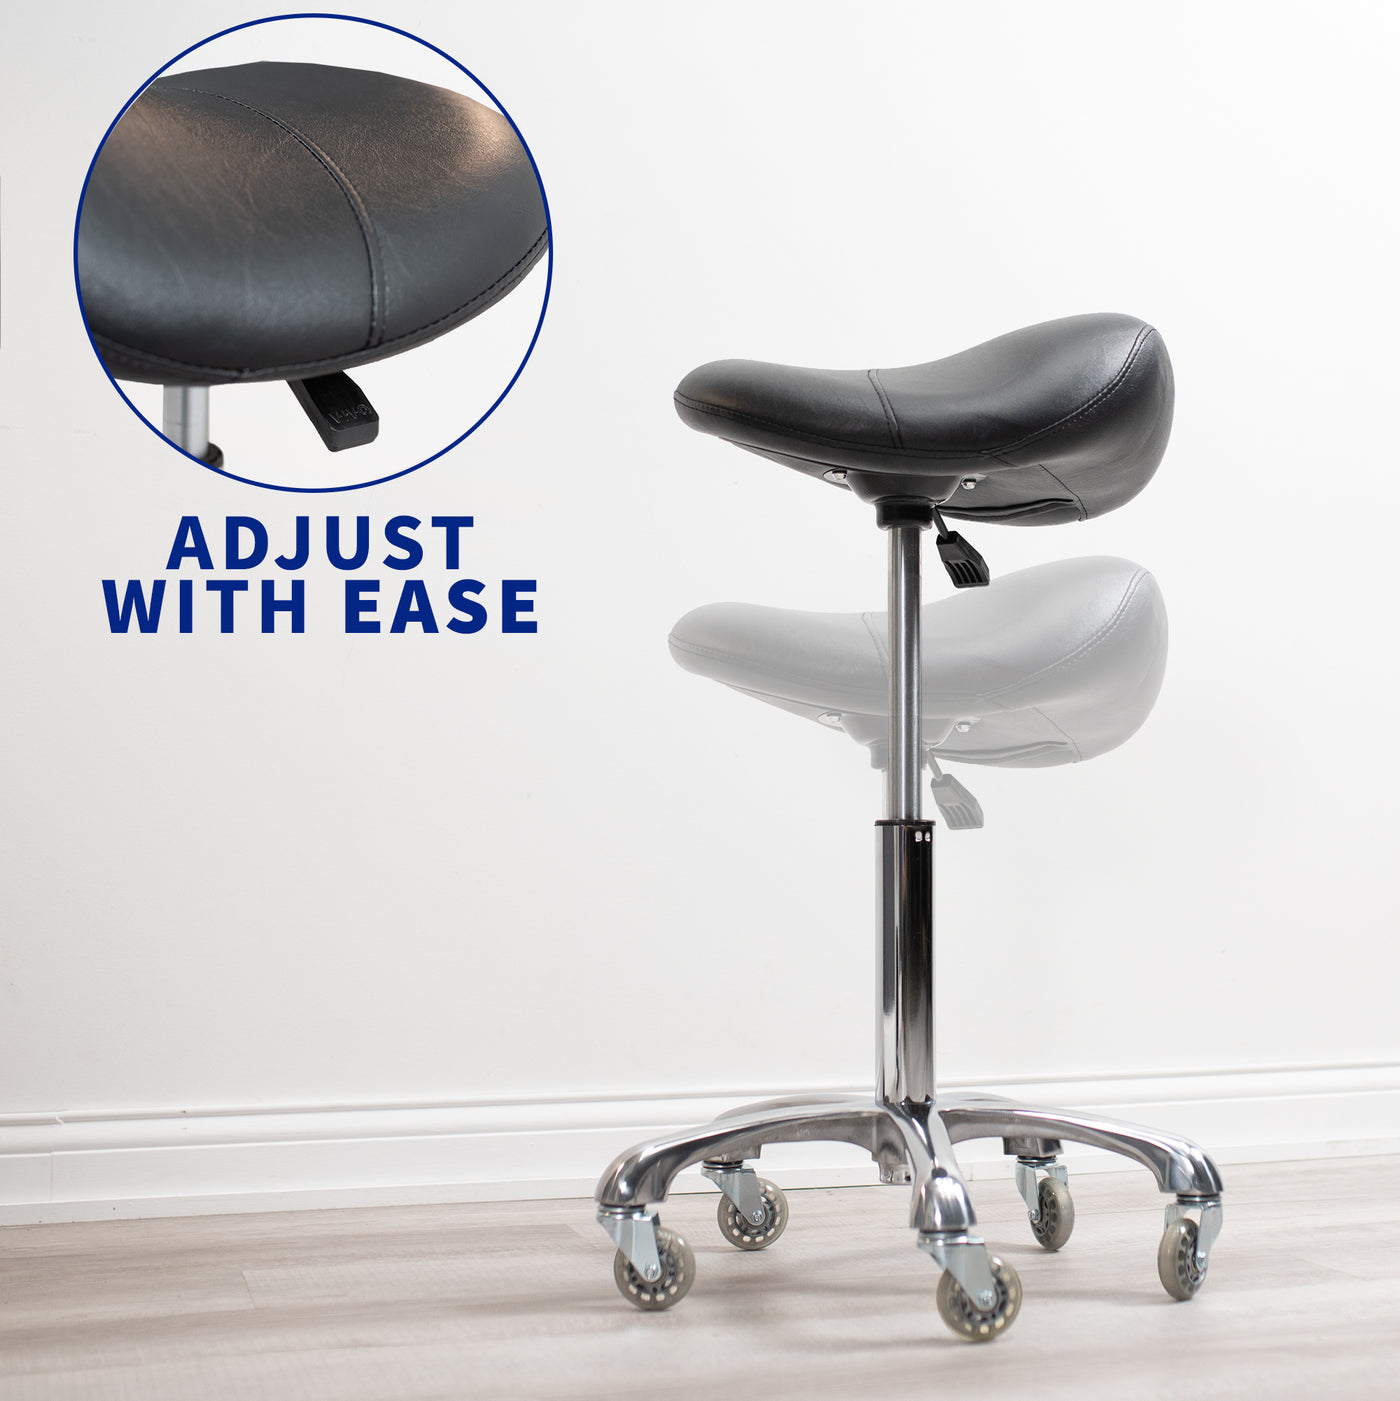 Saddle seat desk chair with wheels for better posture and increased productivity.